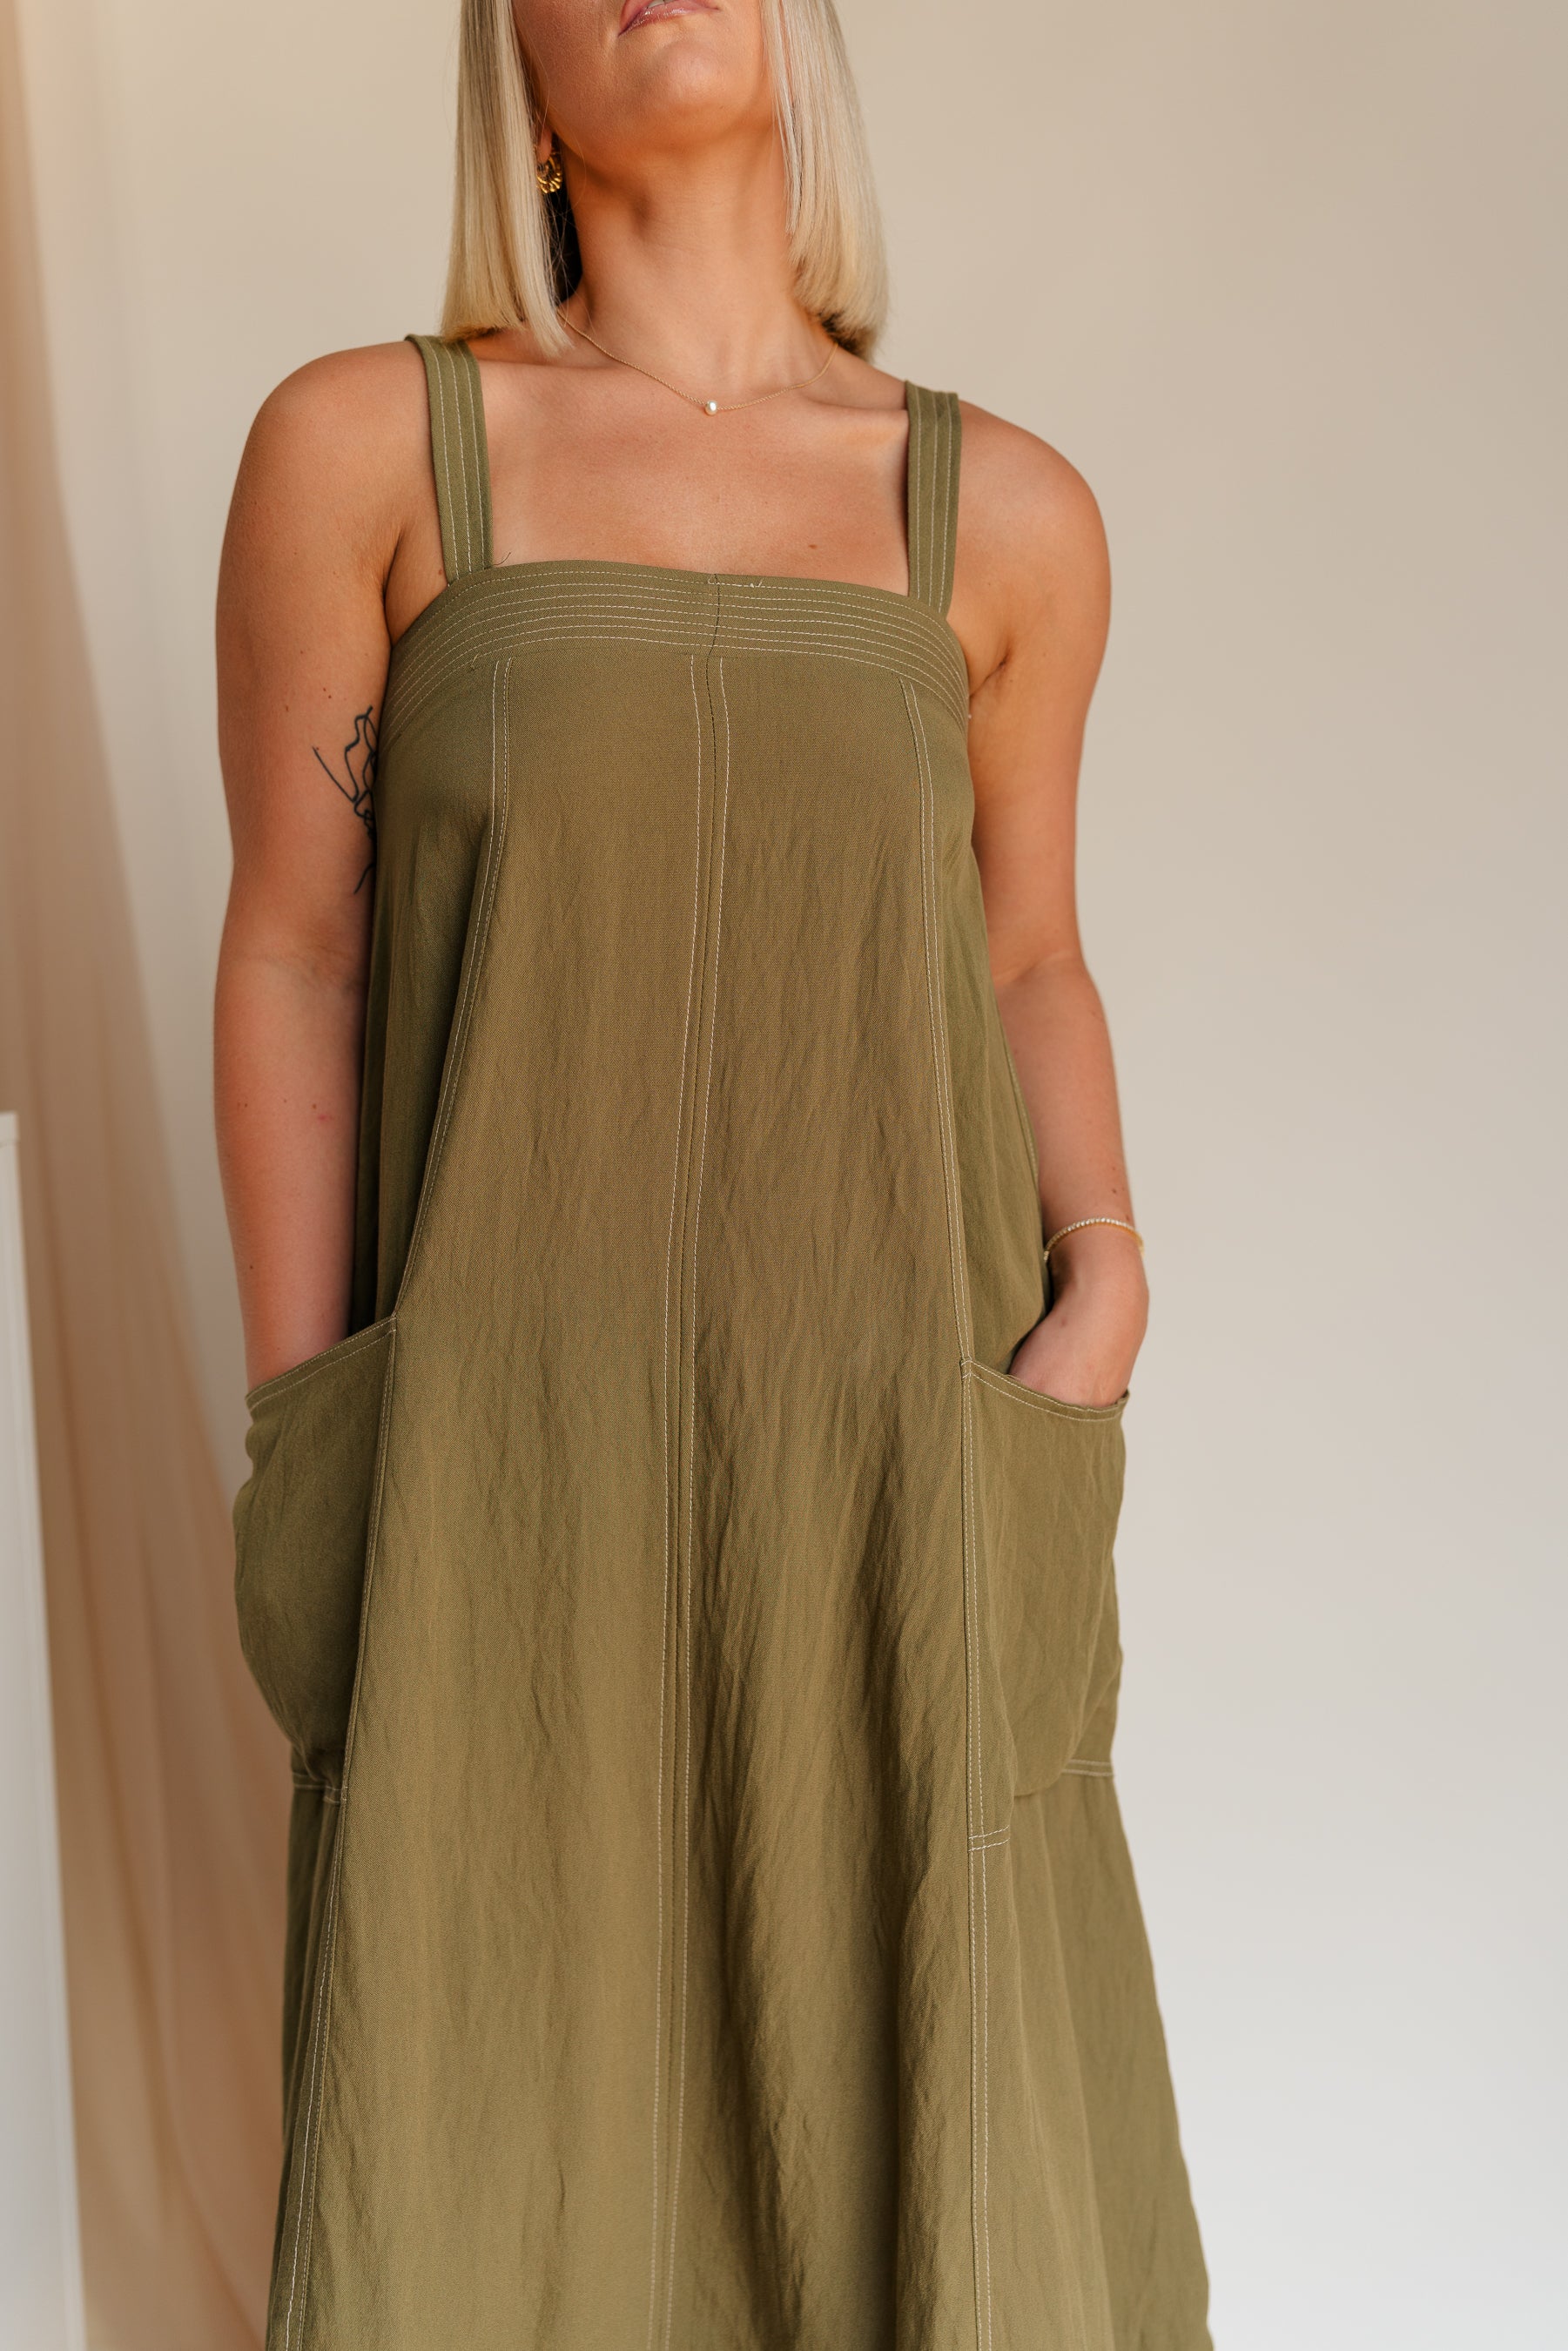 Close up of model wearing Melanie Olive Midi Dress. This is an olive midi dress, with white stitch details, midi length, pockets, and adjustable straps.